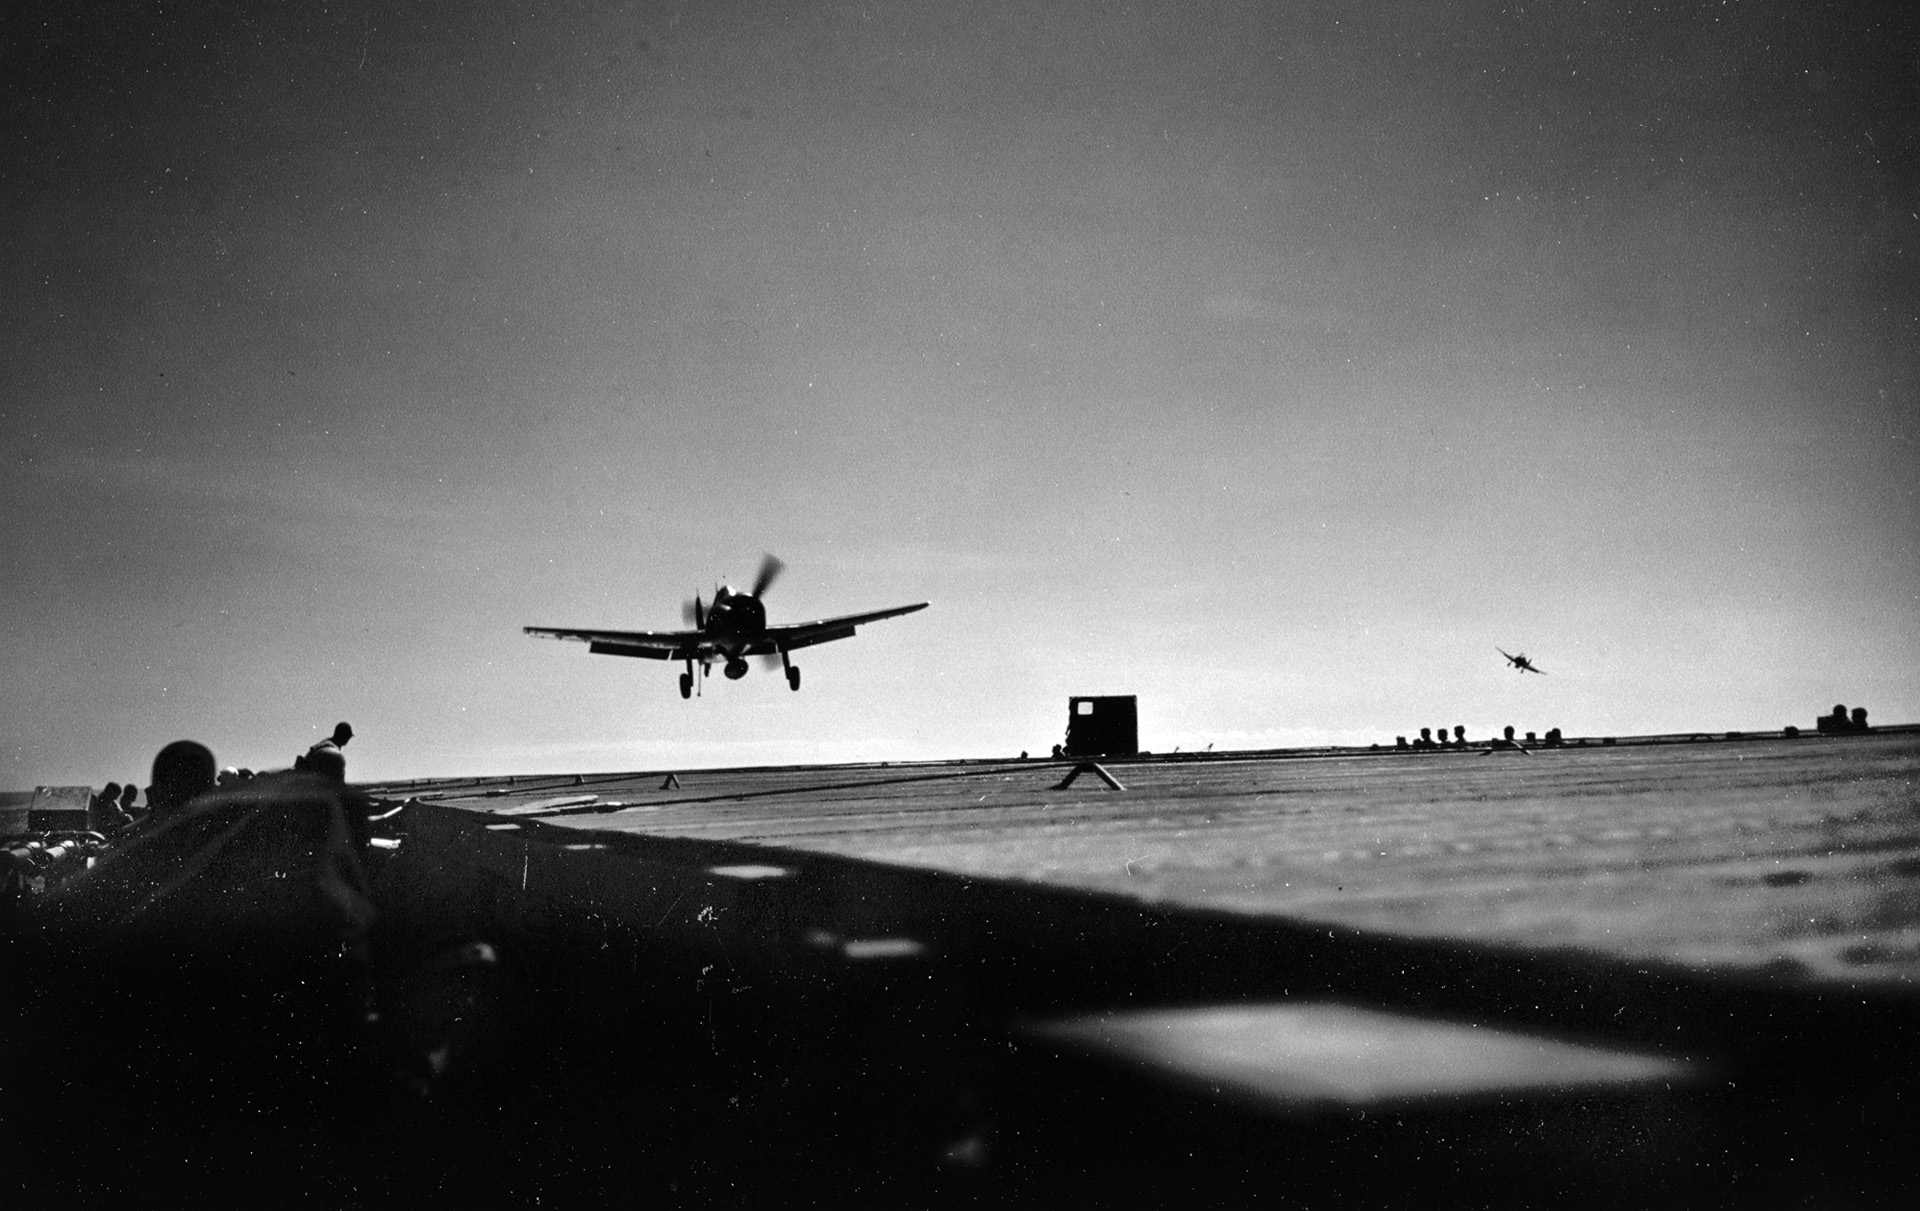 In the gathering darkness of early evening, a U.S. Navy Grumman F6F Hellcat fighter comes in for a landing aboard the aircraft carrier USS Cowpens.